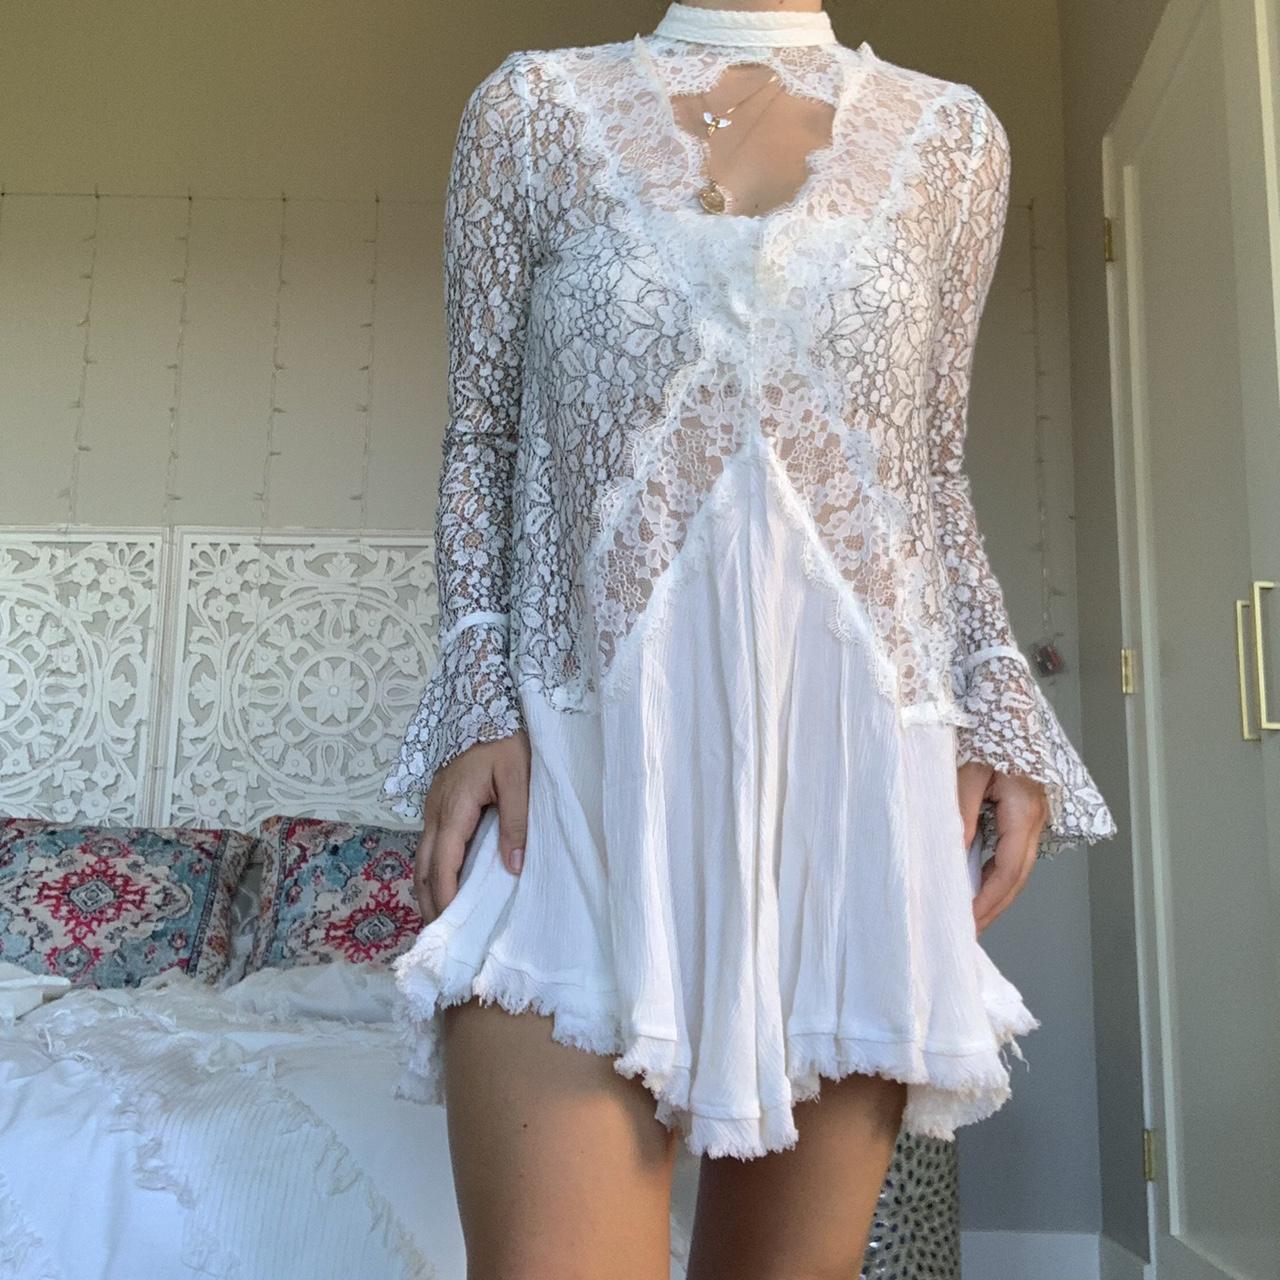 free people tell tale cut-out lace tunic dress. the